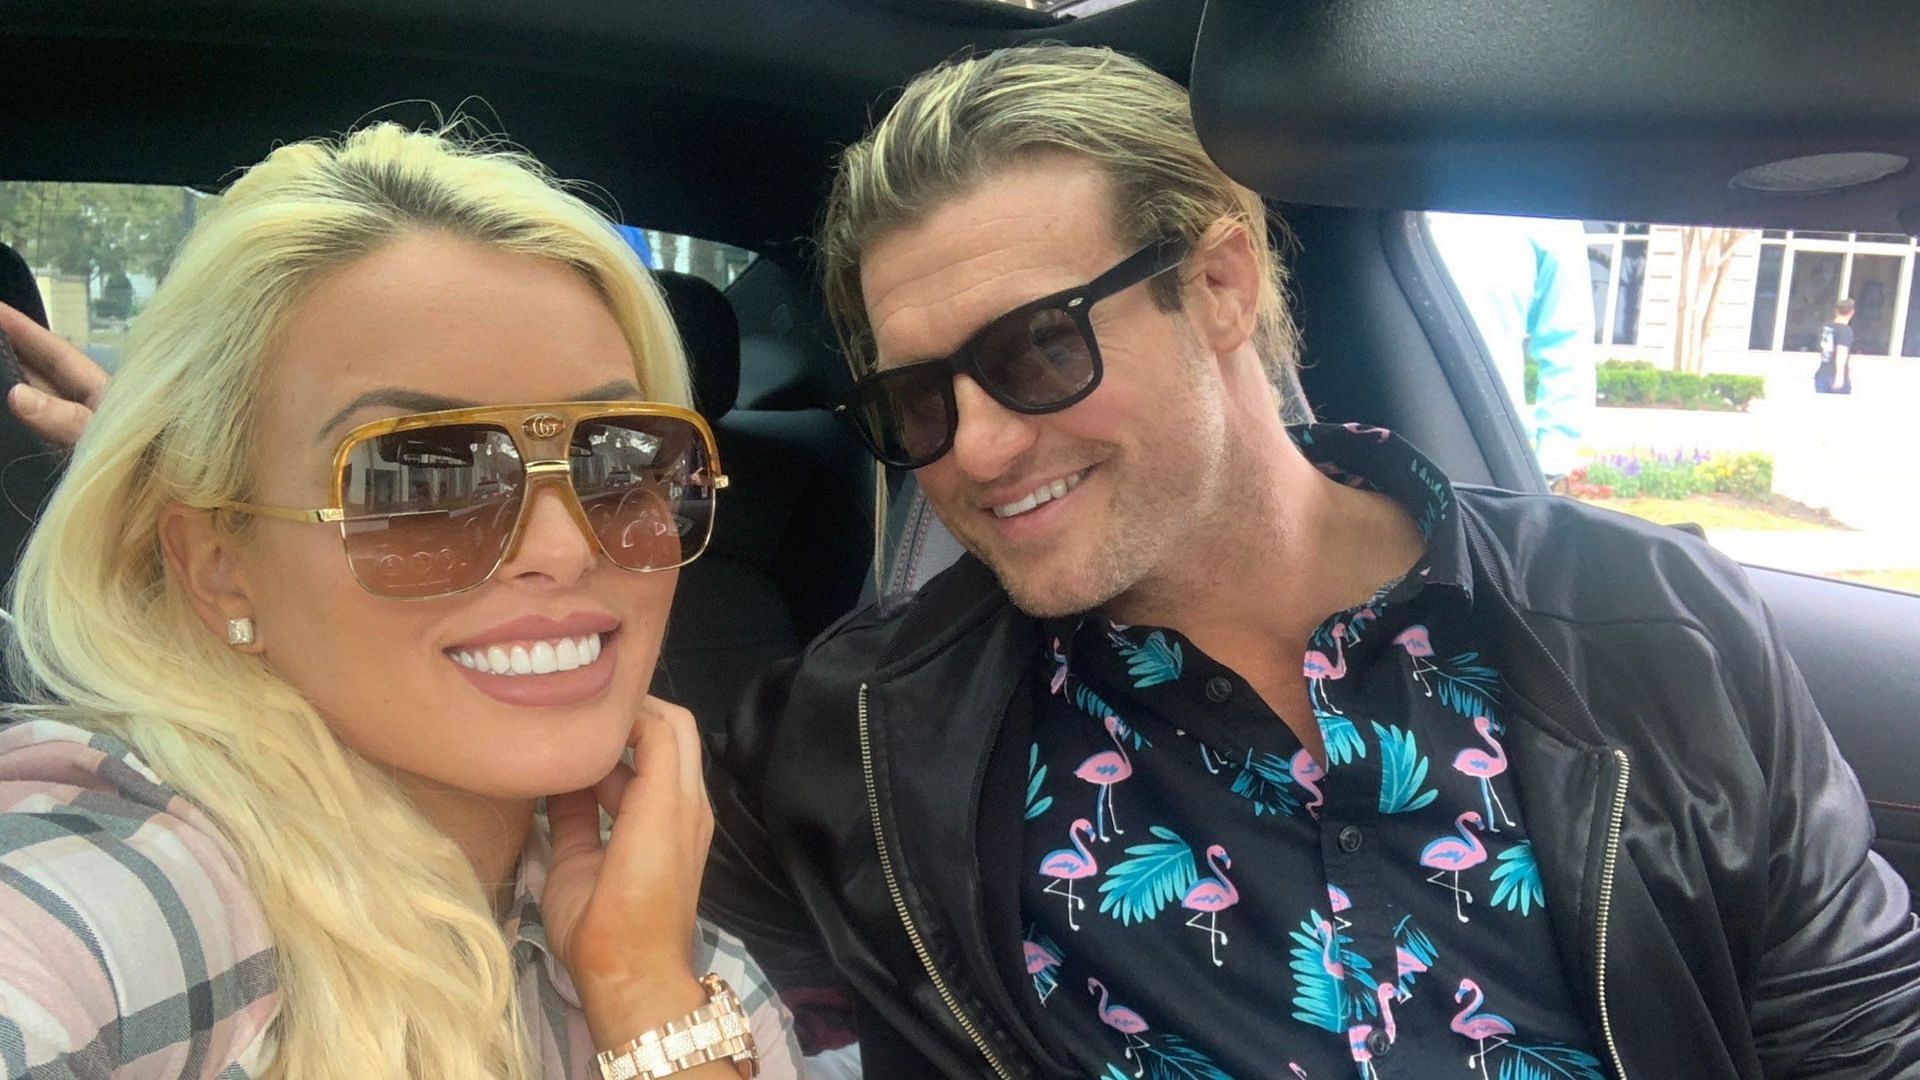 Dolph Ziggler and Mandy Rose had an on-screen romance in WWE